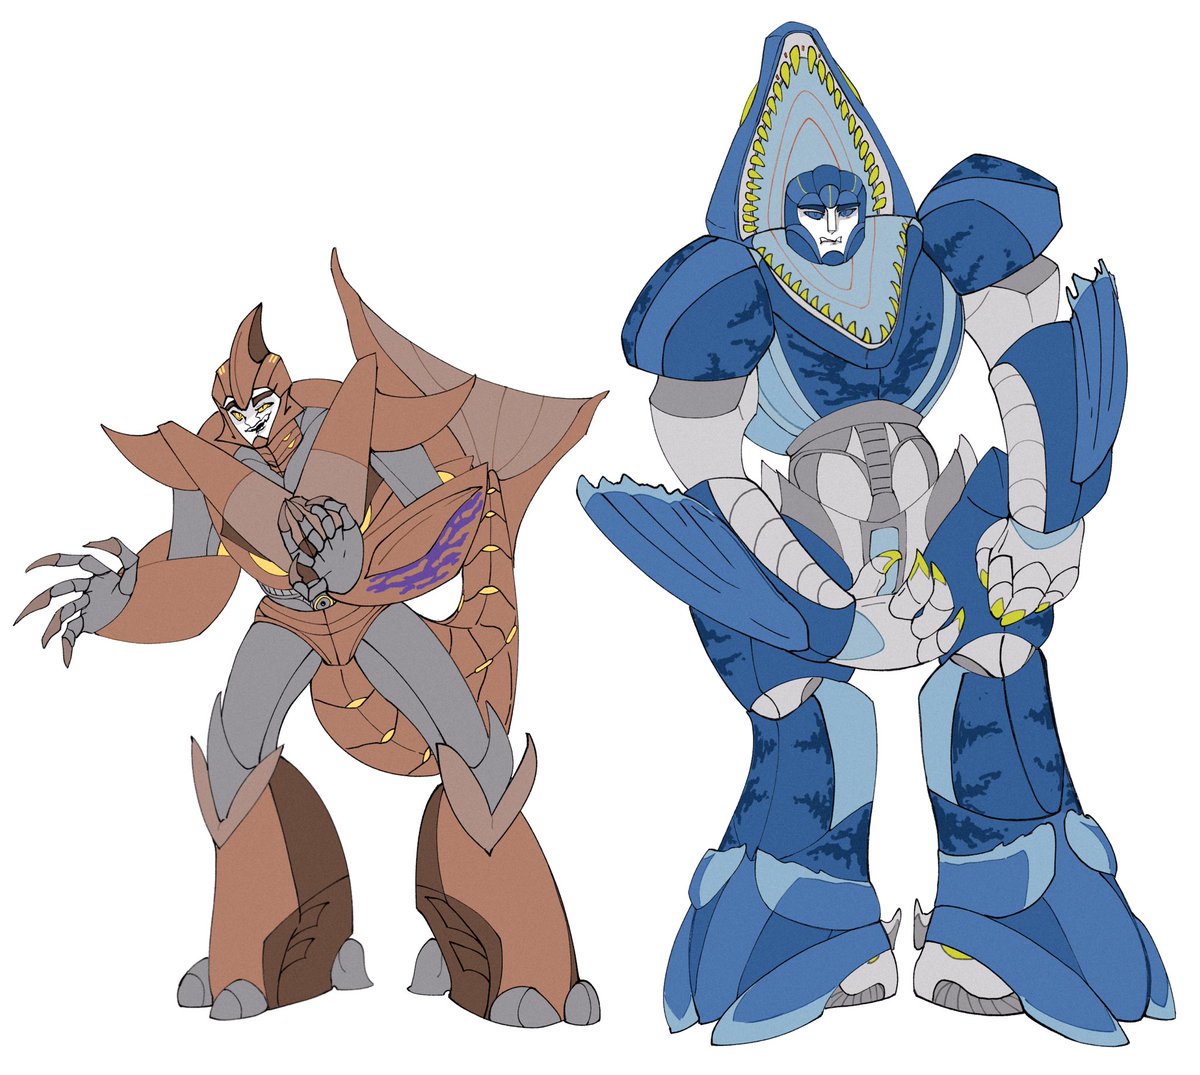 I also want this four to be here too. Even if no one sees them I just want my children to have their place between everyone else’s characters

#Transformers #Transformersoc #transformersfanart #tfoc